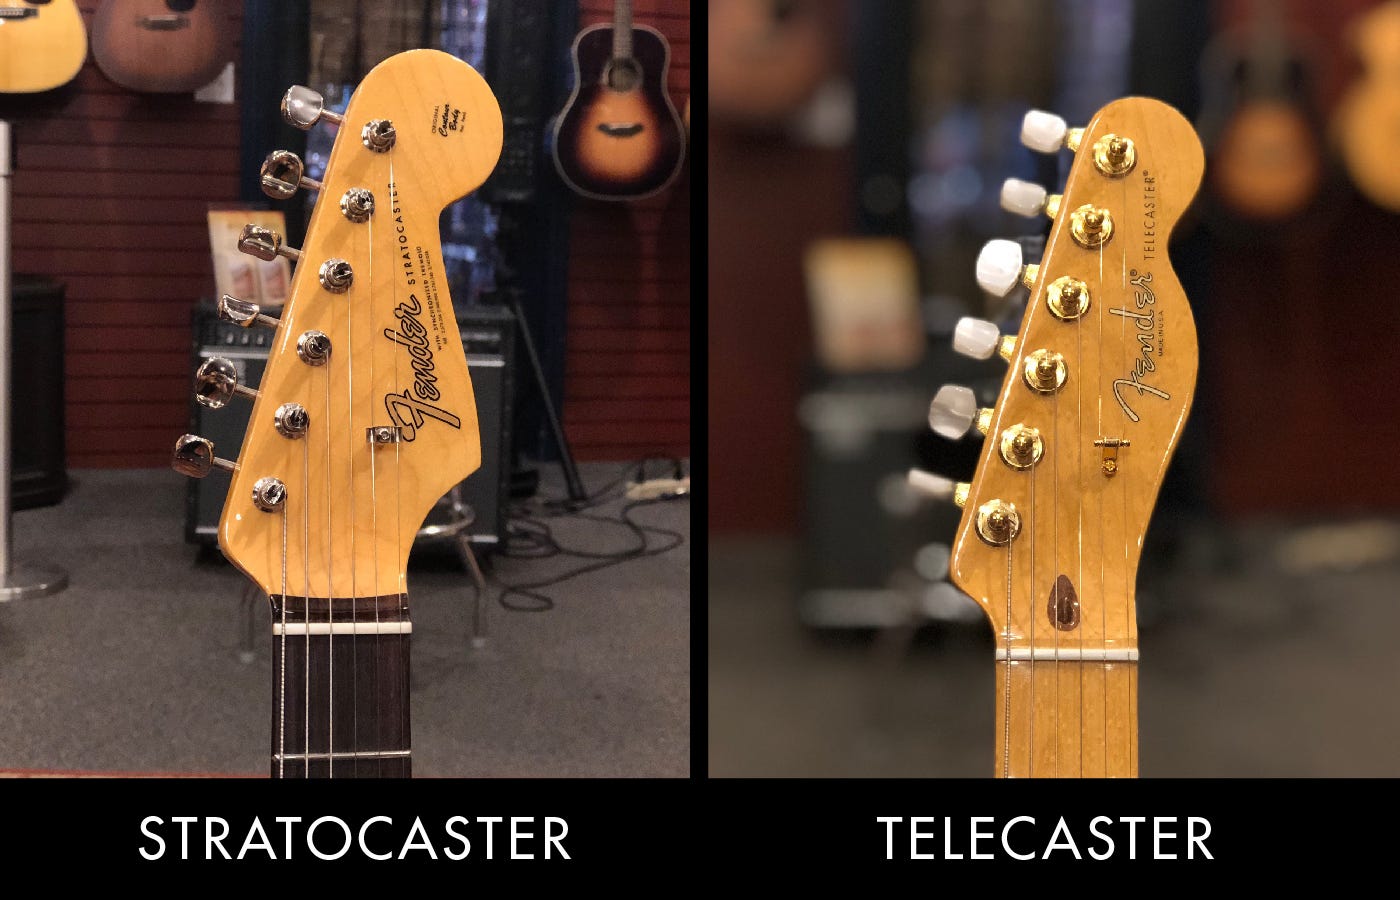 Guitar Legends Tele Vs Strat Whats The Difference By Cascio Music Medium